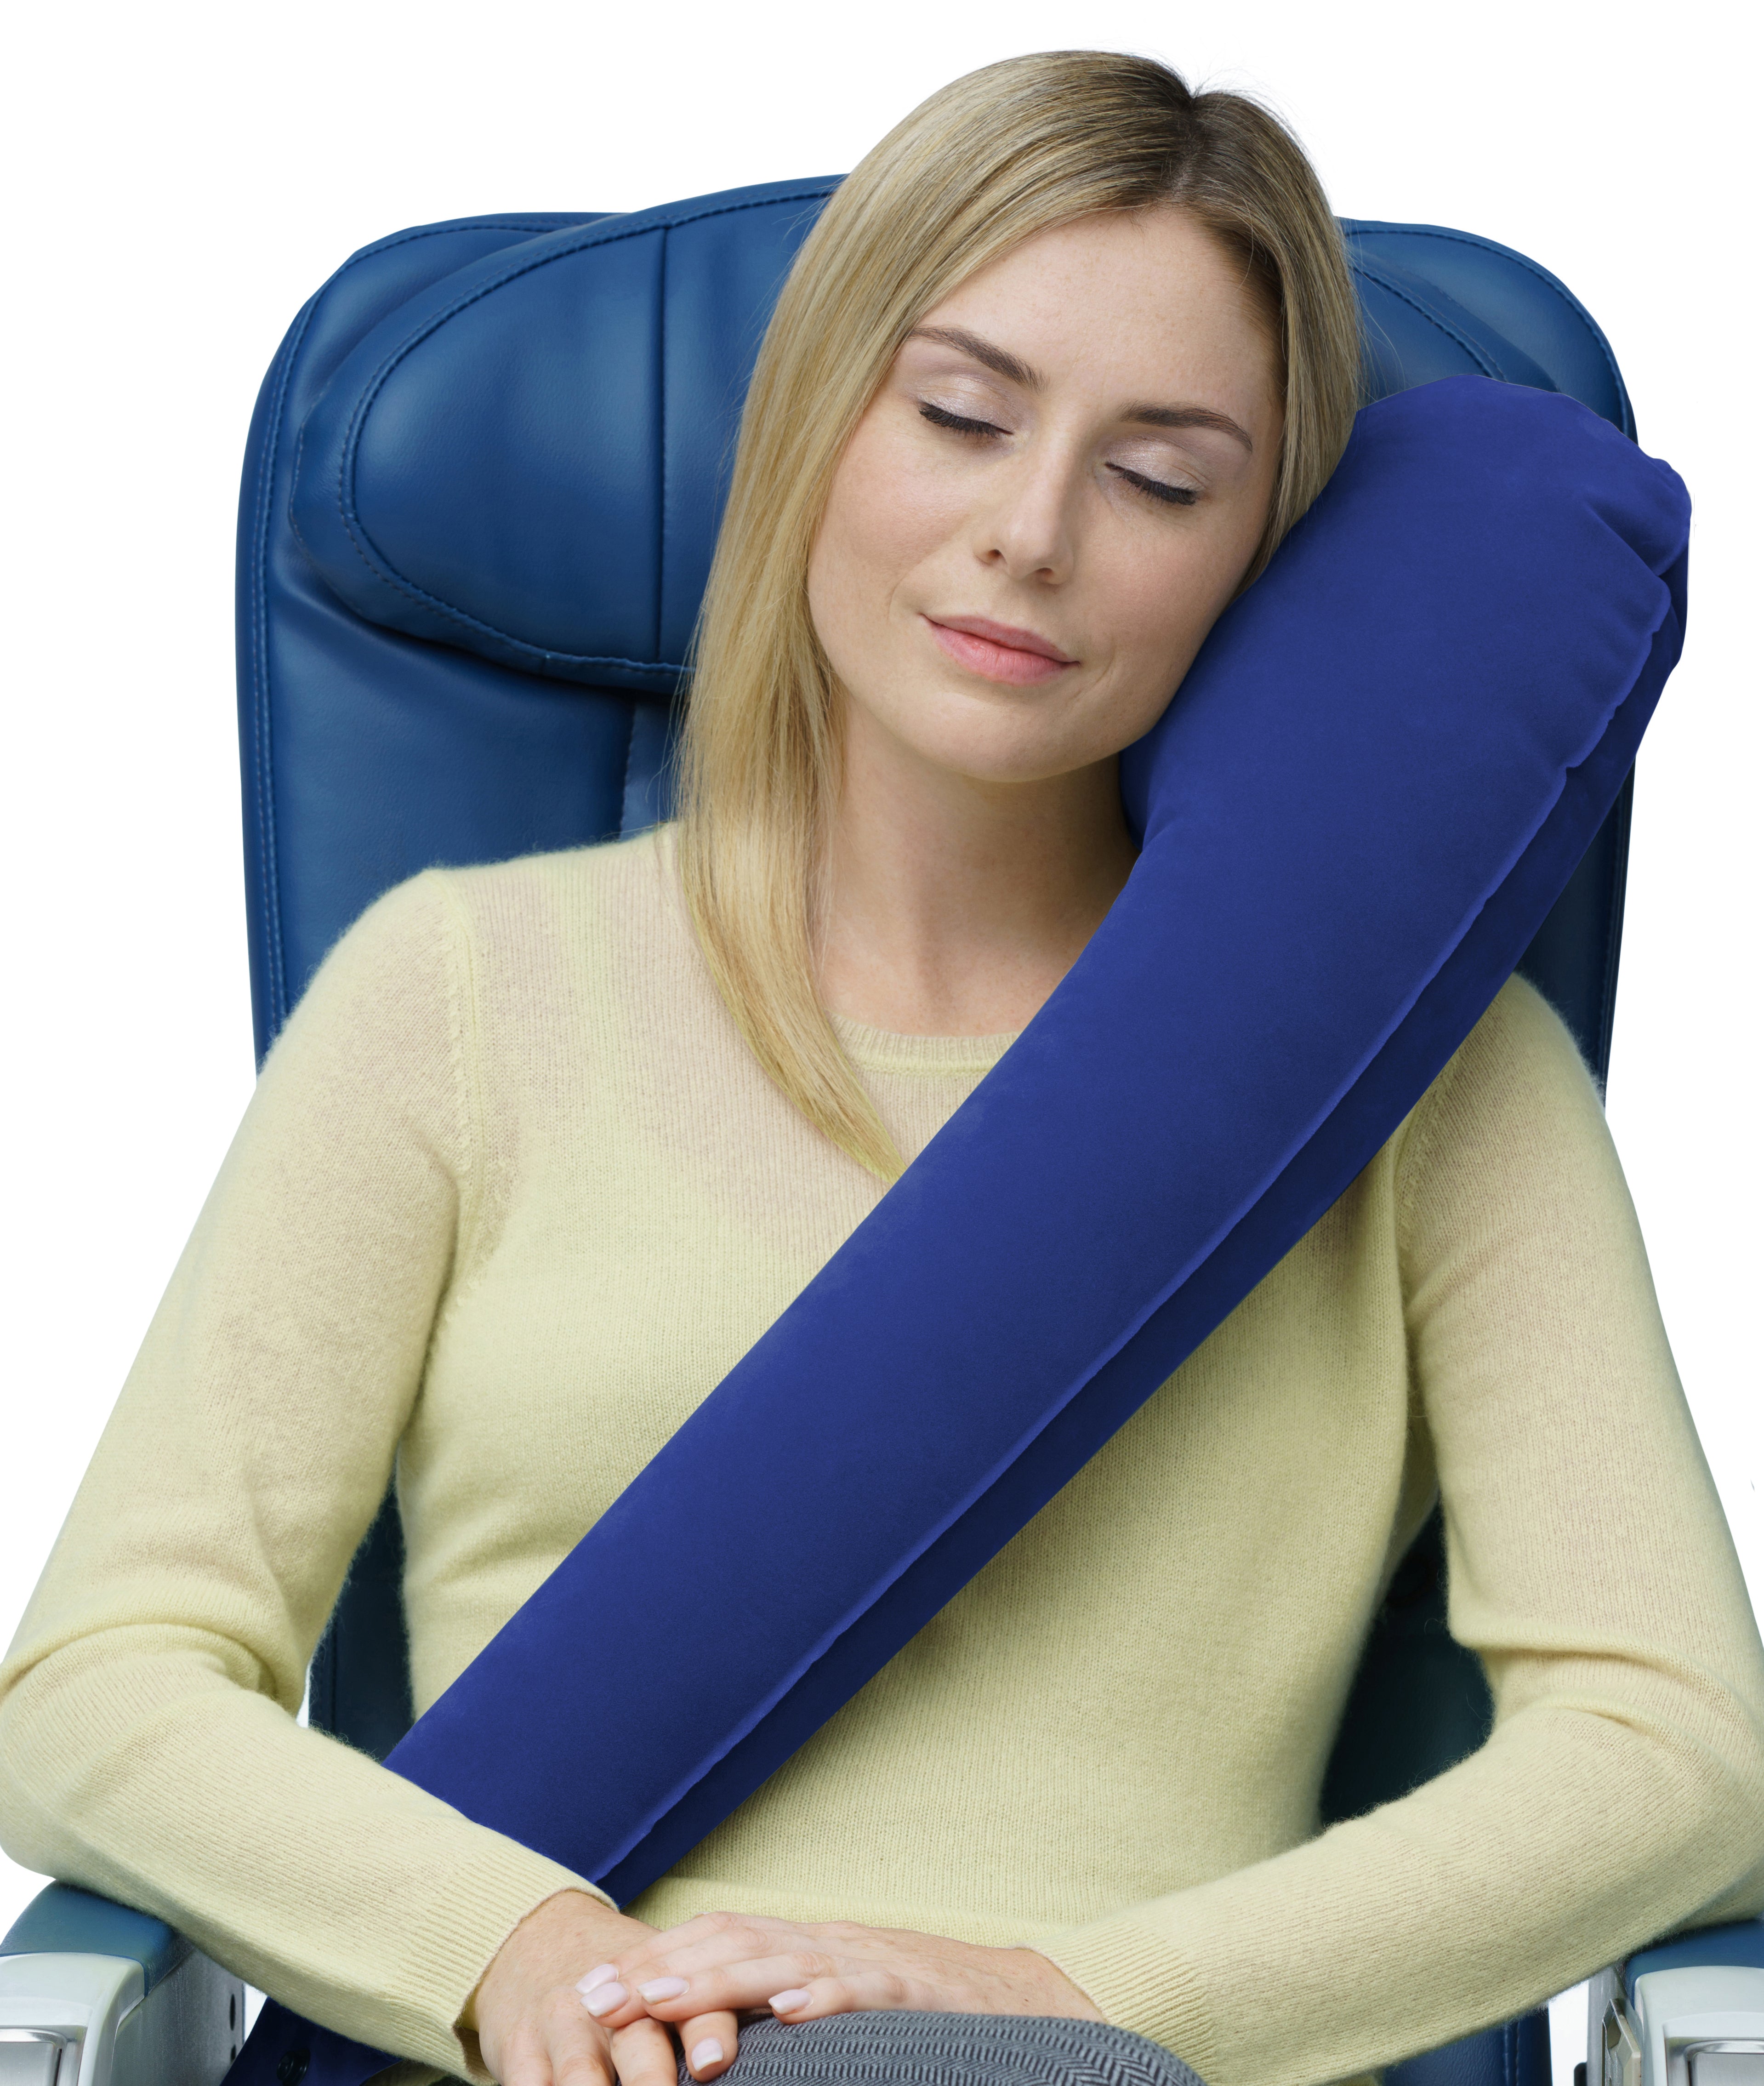 inflatable travel pillow perth